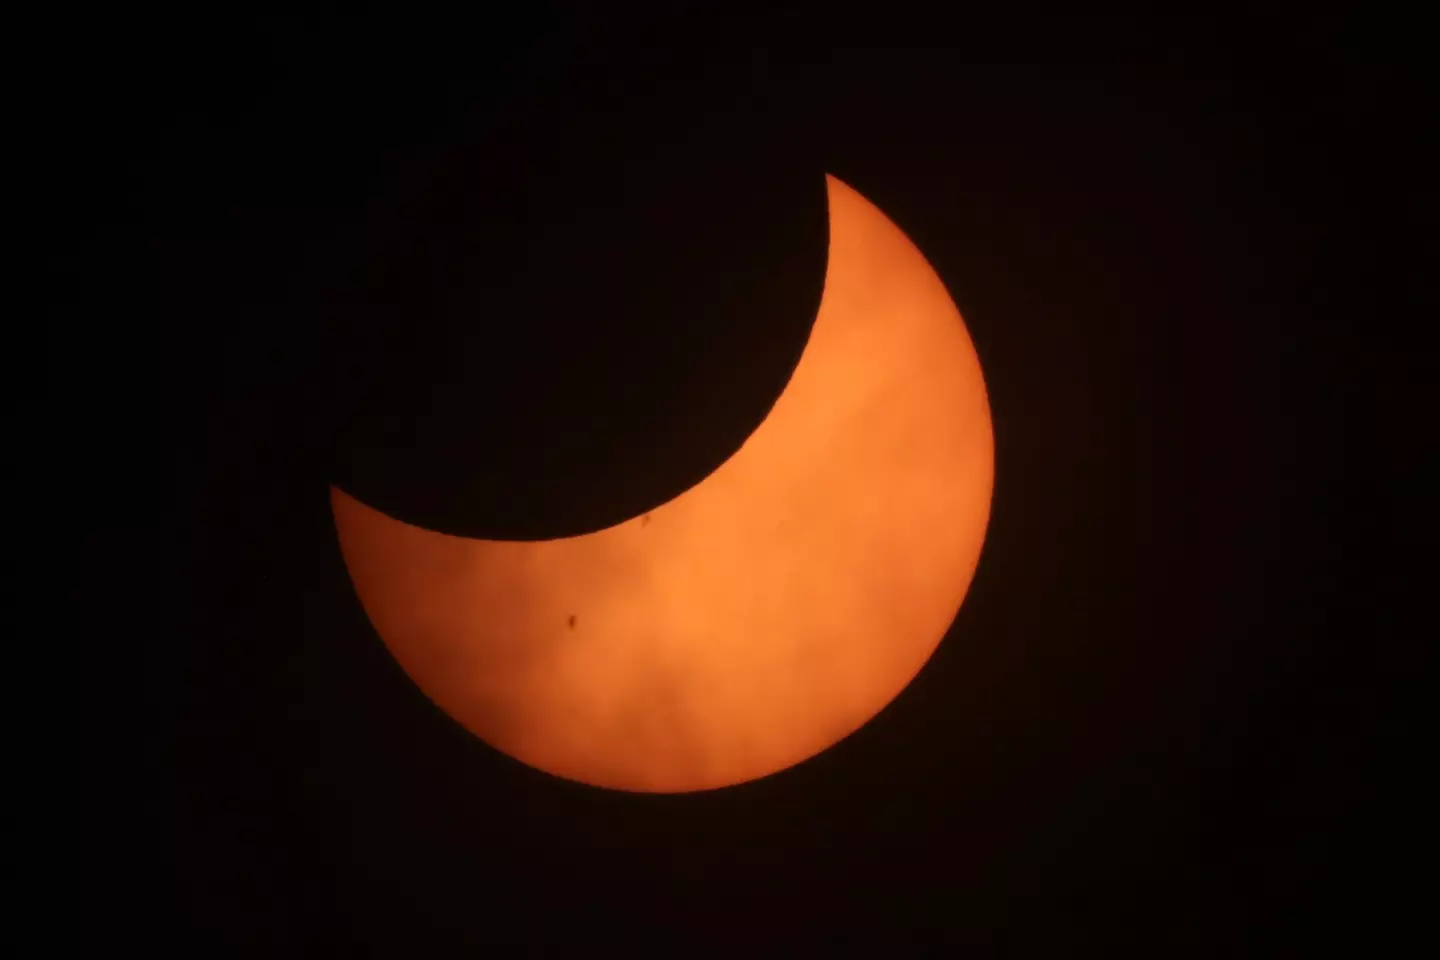 Last year's annular solar eclipse seen from the Luis Enrique Erro Planetarium of the National Polytechnic Institute in Mexico City.